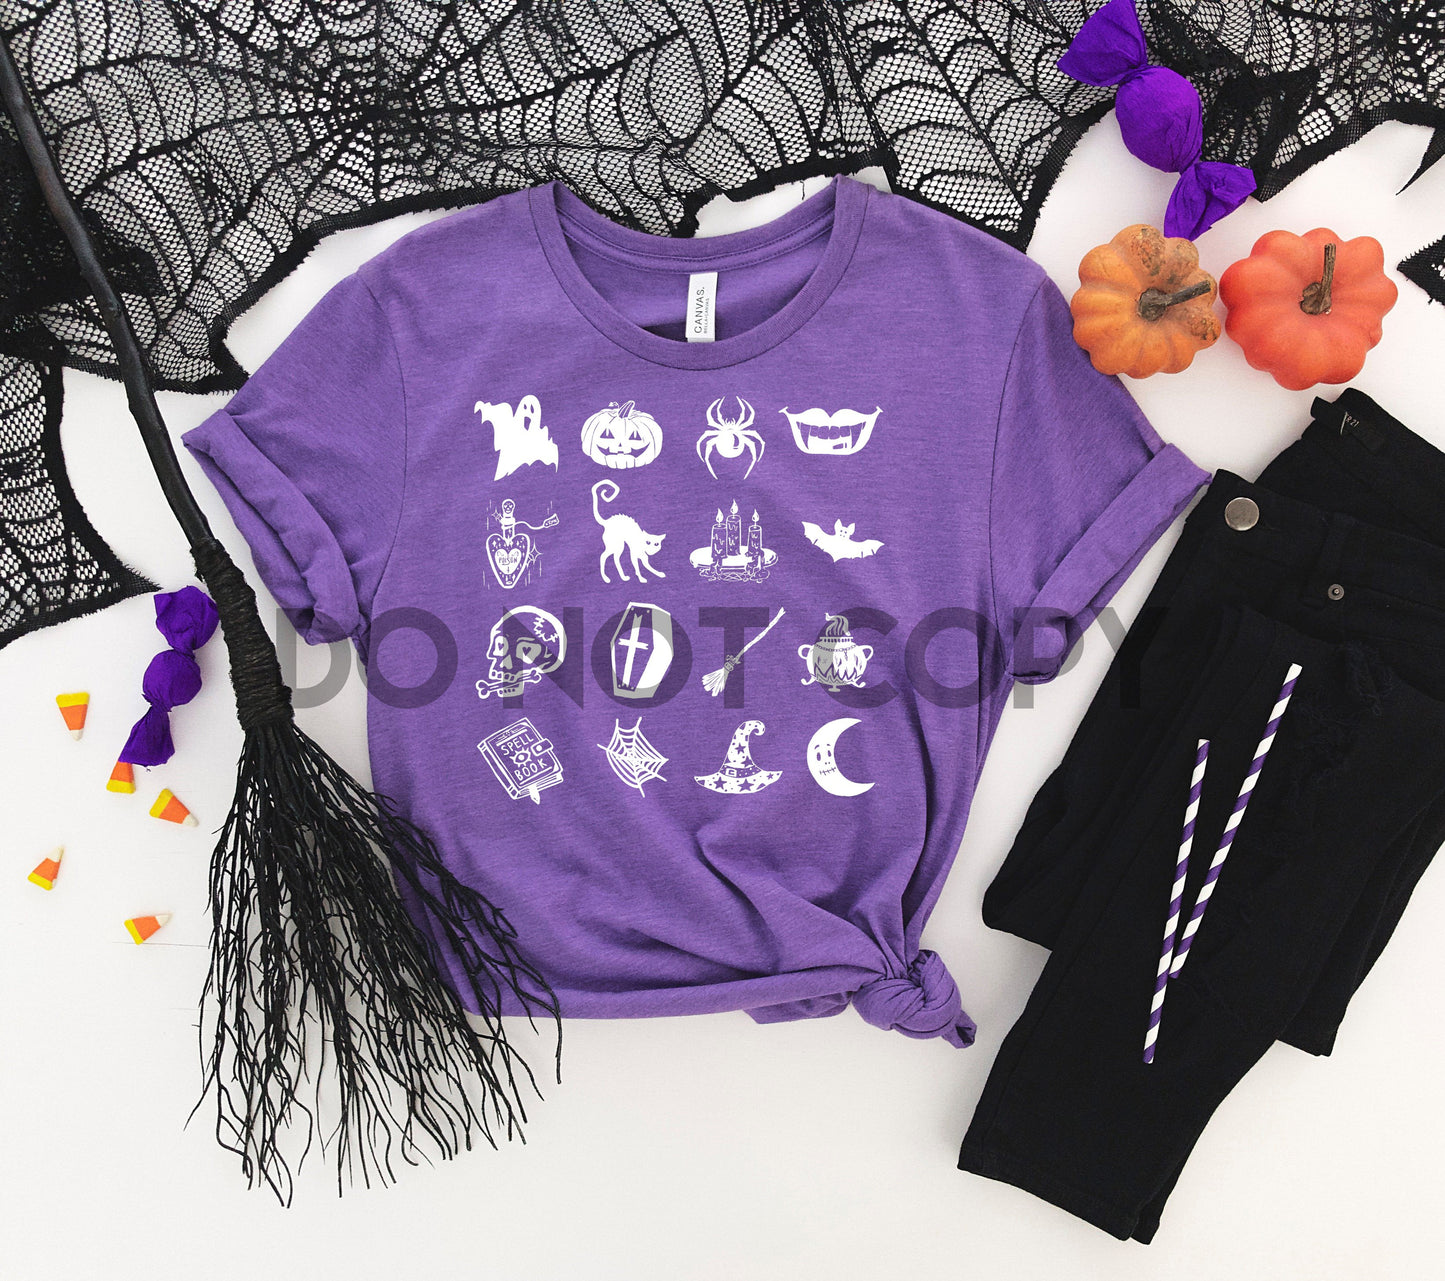 Halloween favorites image collection WHITE or BLACK INK one color Screen print transfer